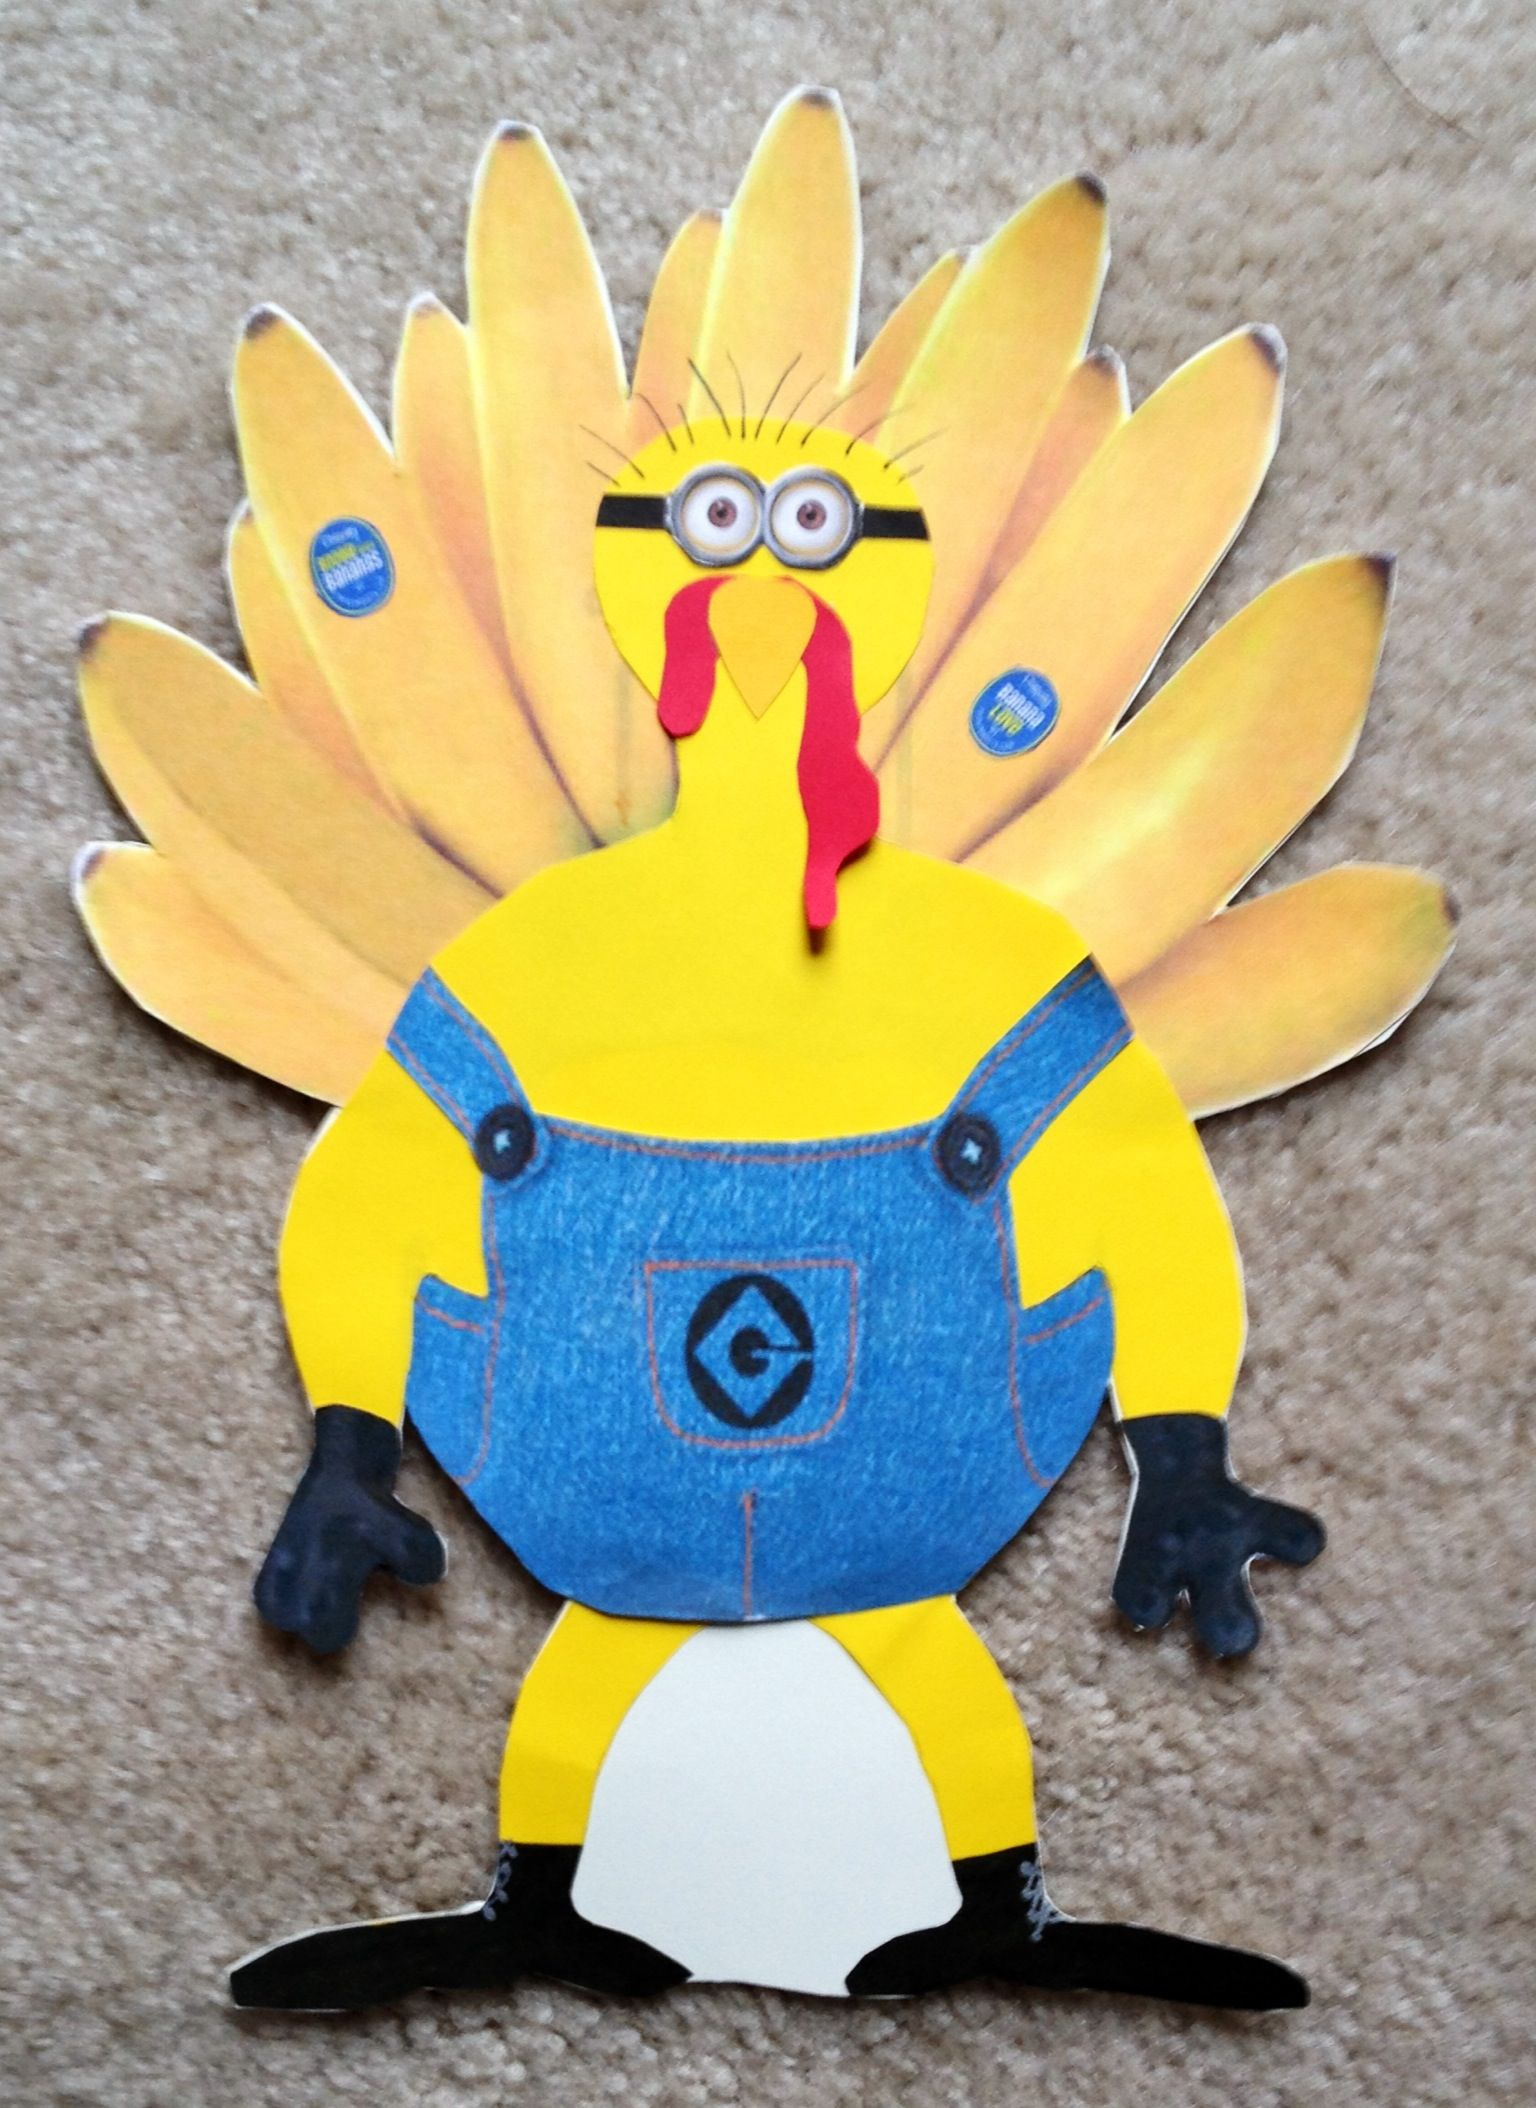 turkey-disguise-project-i-am-not-a-turkey-i-am-a-minion-who-works-for